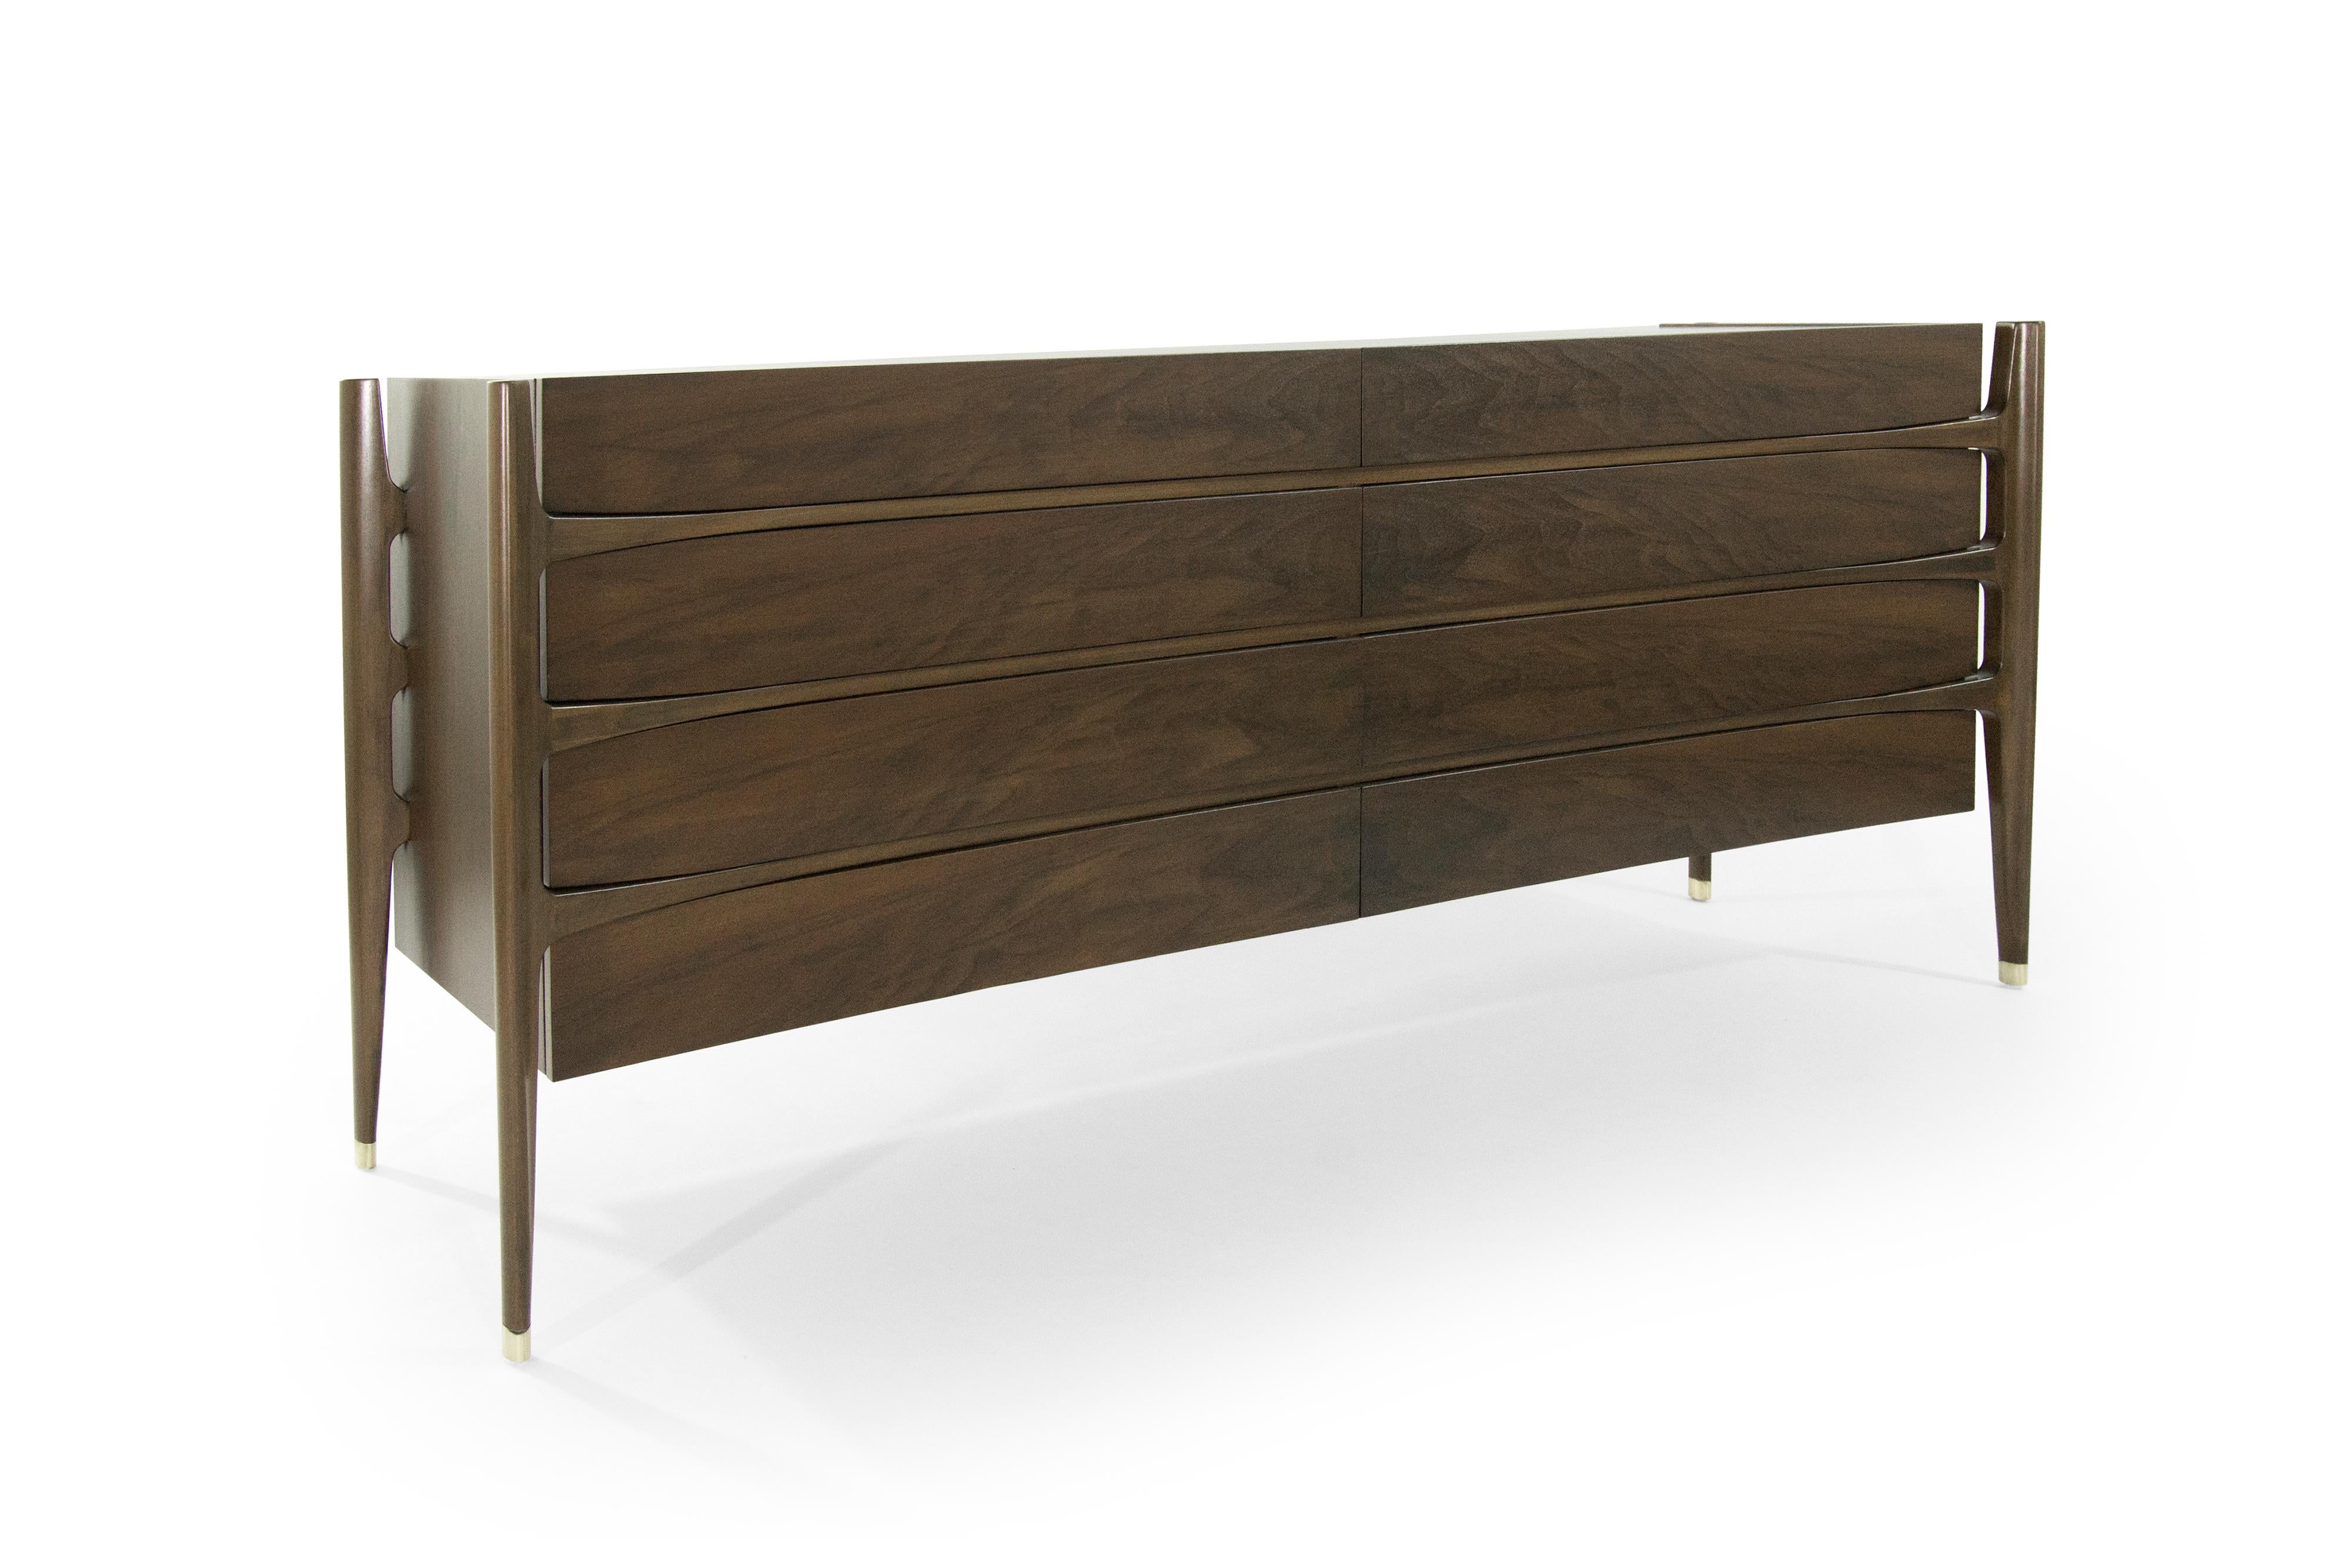 Extremely rare credenza in rosewood designed by Jorgen Clausen for Brande Møbelfabrik, circa 1950s. Fully restored.
Often misattributed to Edmond Spence. This particular piece features bookmatched drawers, exterior framing and brass sabots.